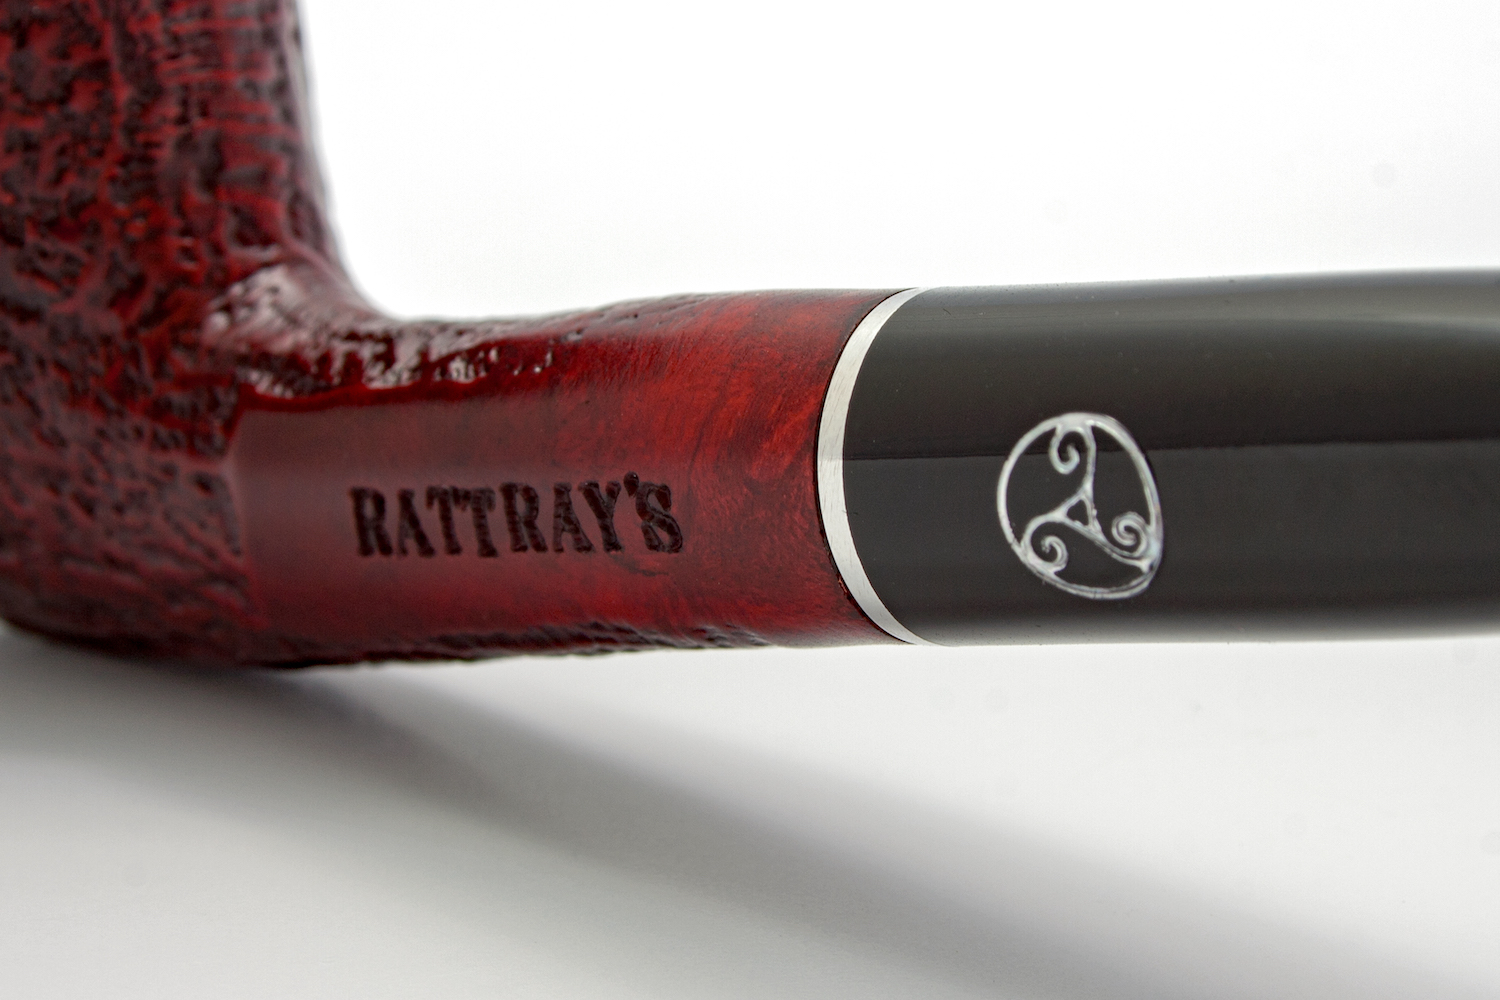 Rattray's Blowers Daughter Sand 49